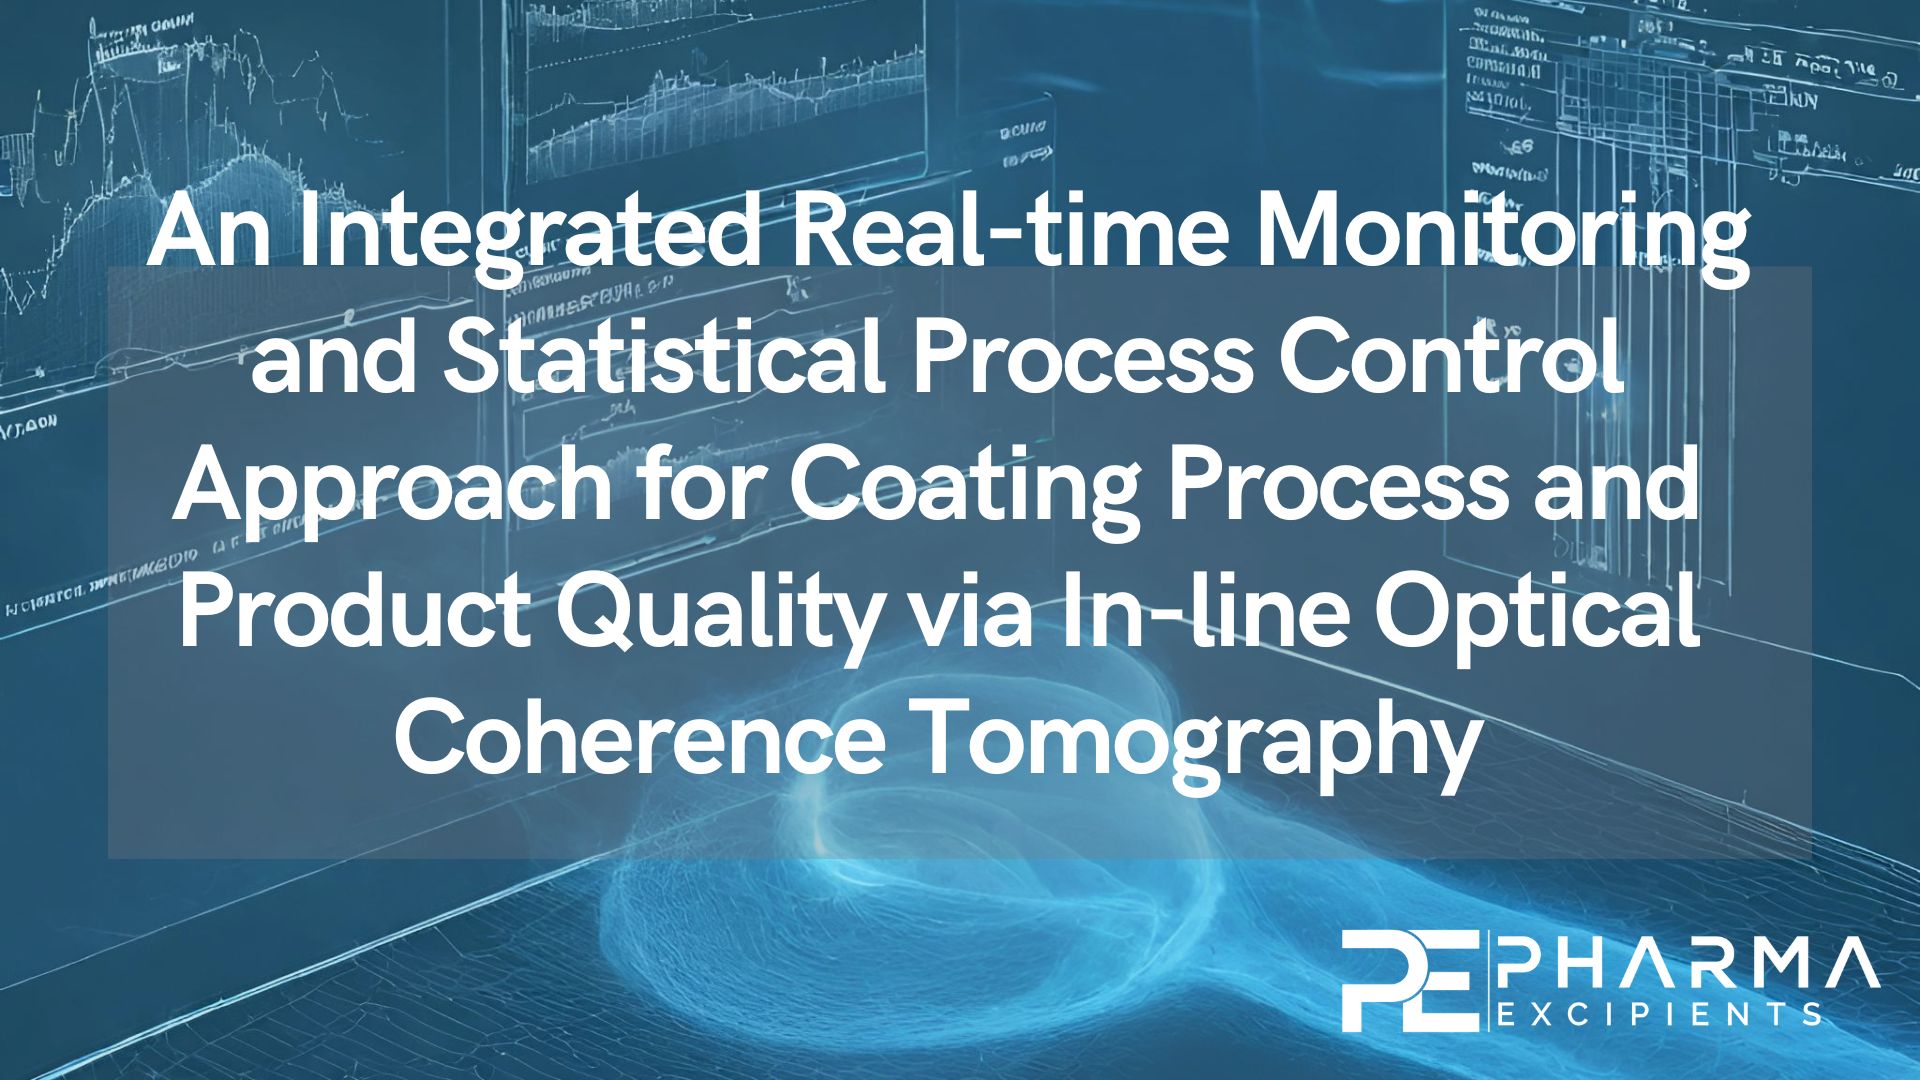 An Integrated Real-time Monitoring and Statistical Process Control Approach for Coating Process and Product Quality via In-line Optical Coherence Tomography